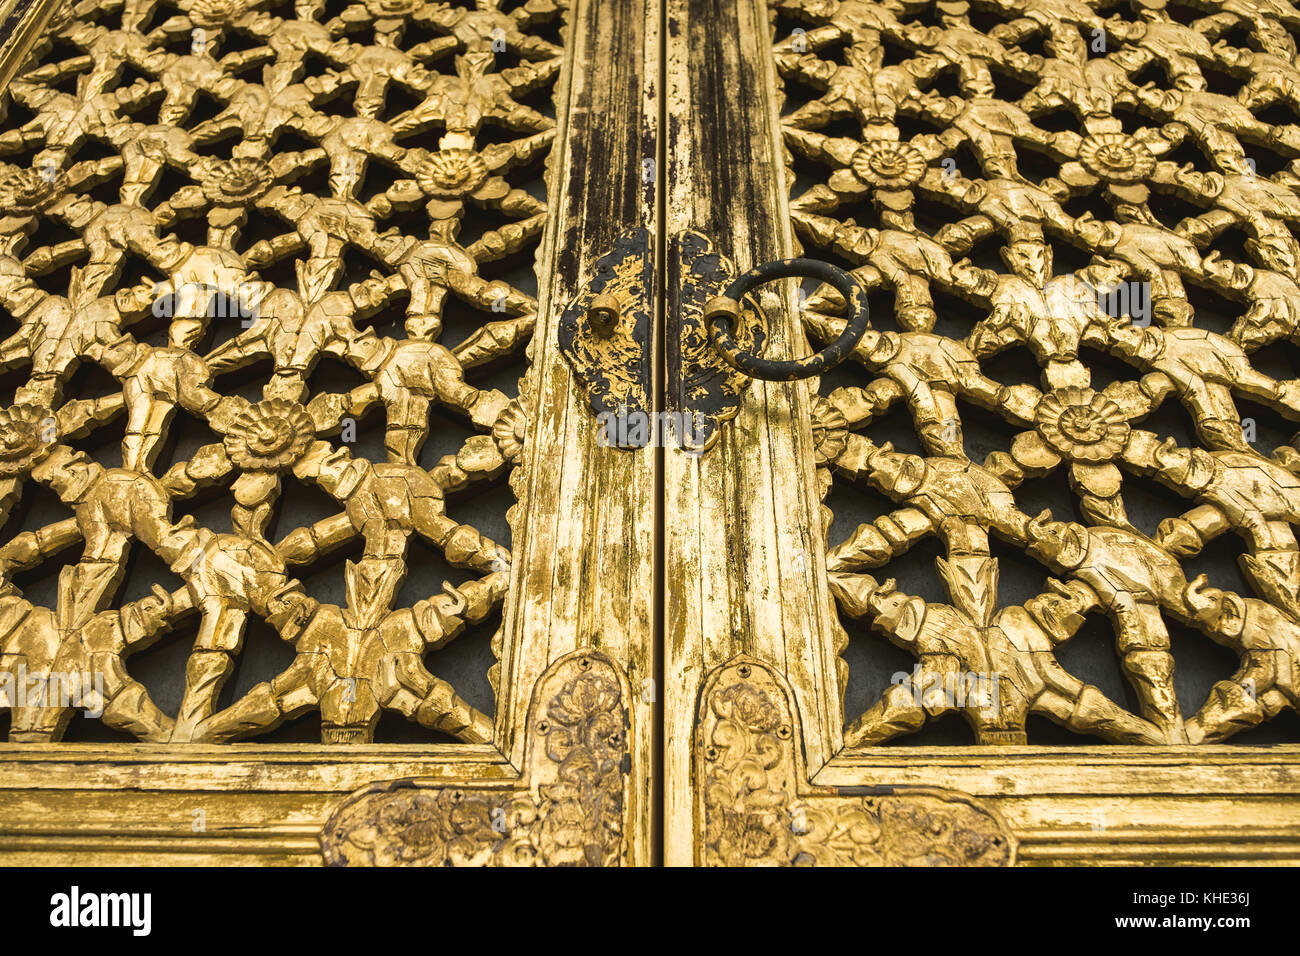 The worn out door to a temple in korea painted in gold paint. Stock Photo